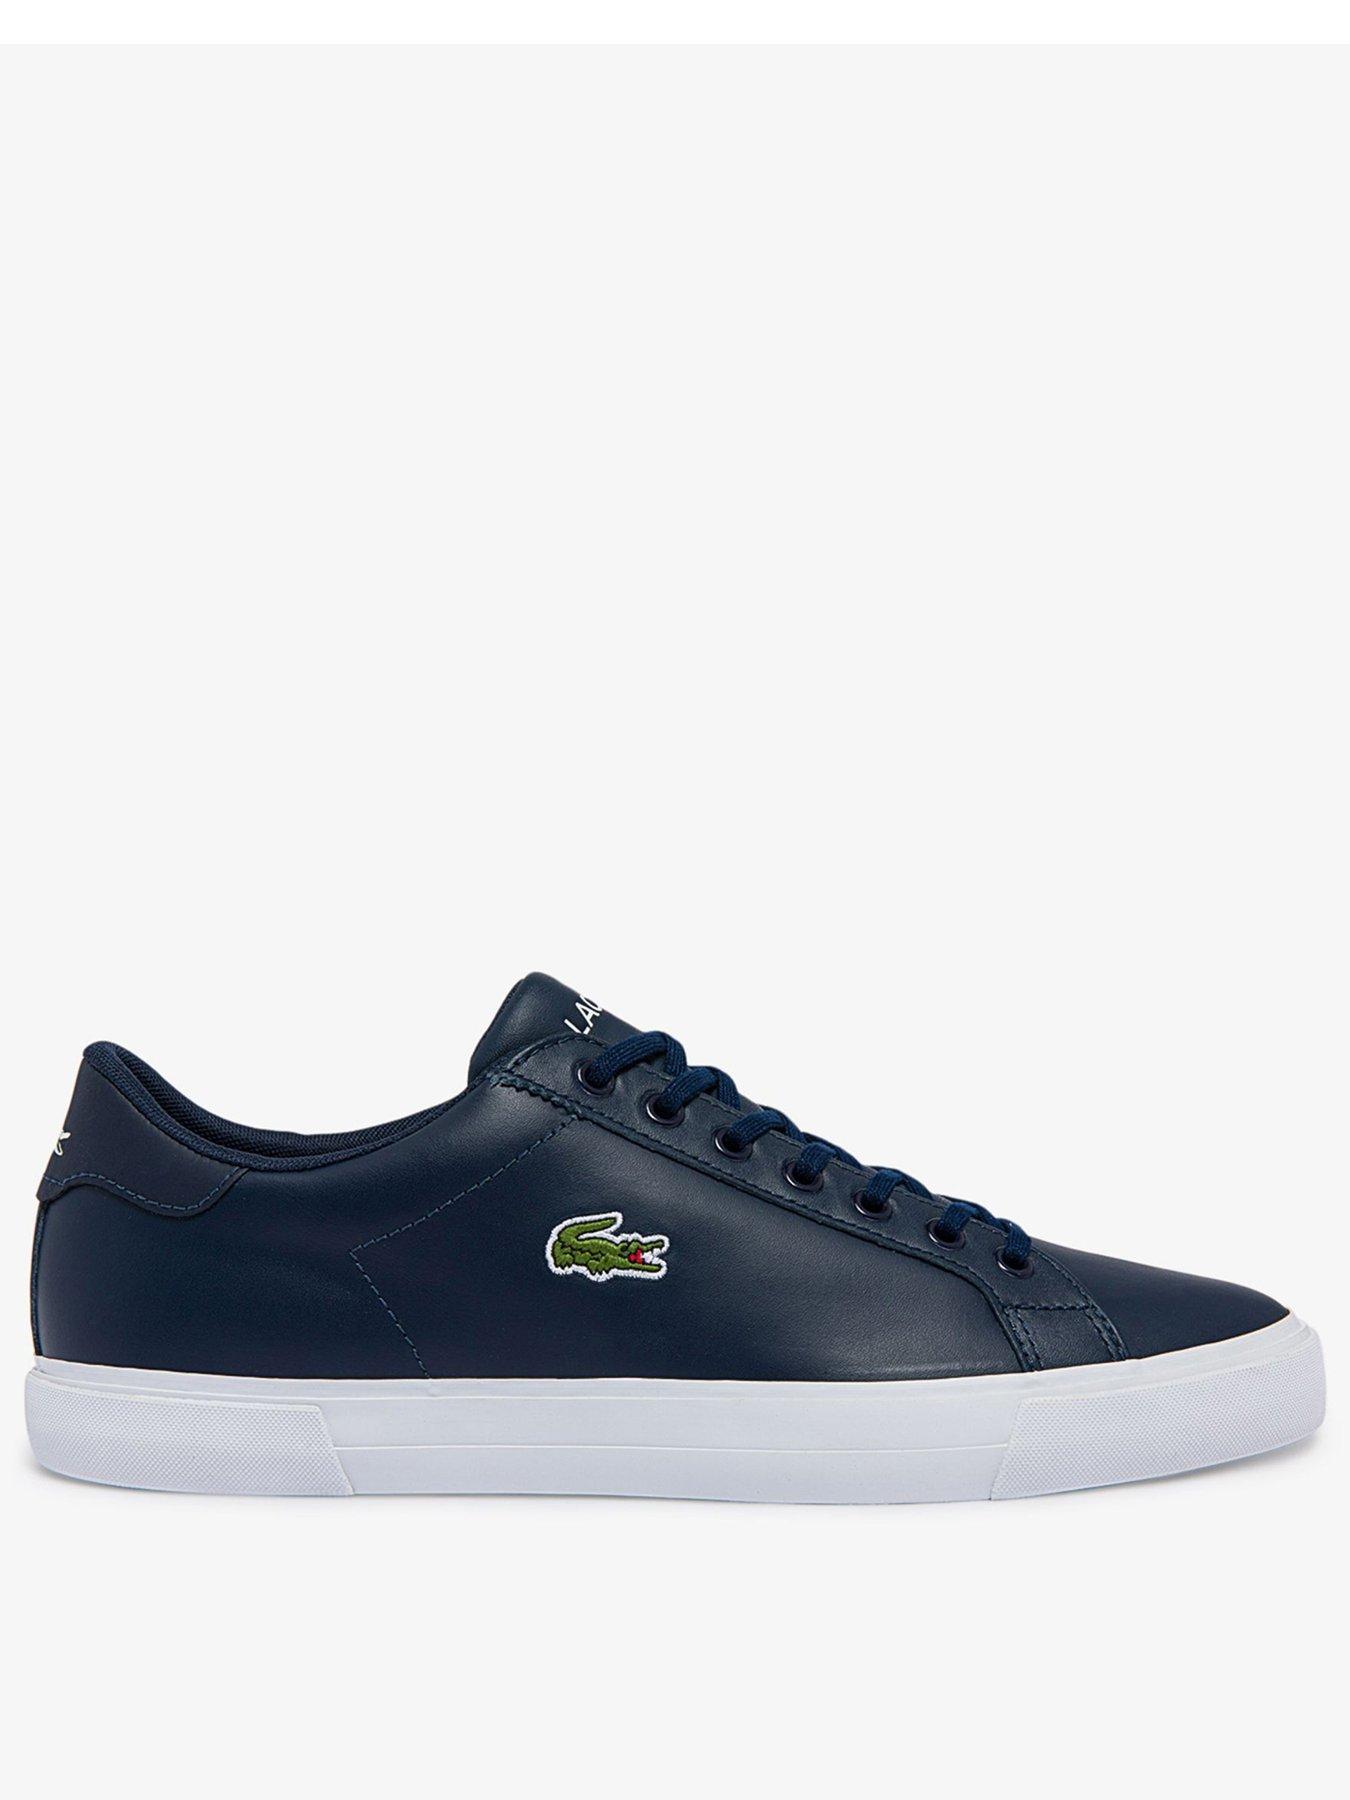 Lacoste Lerond Plus Trainers - Navy/White | very.co.uk